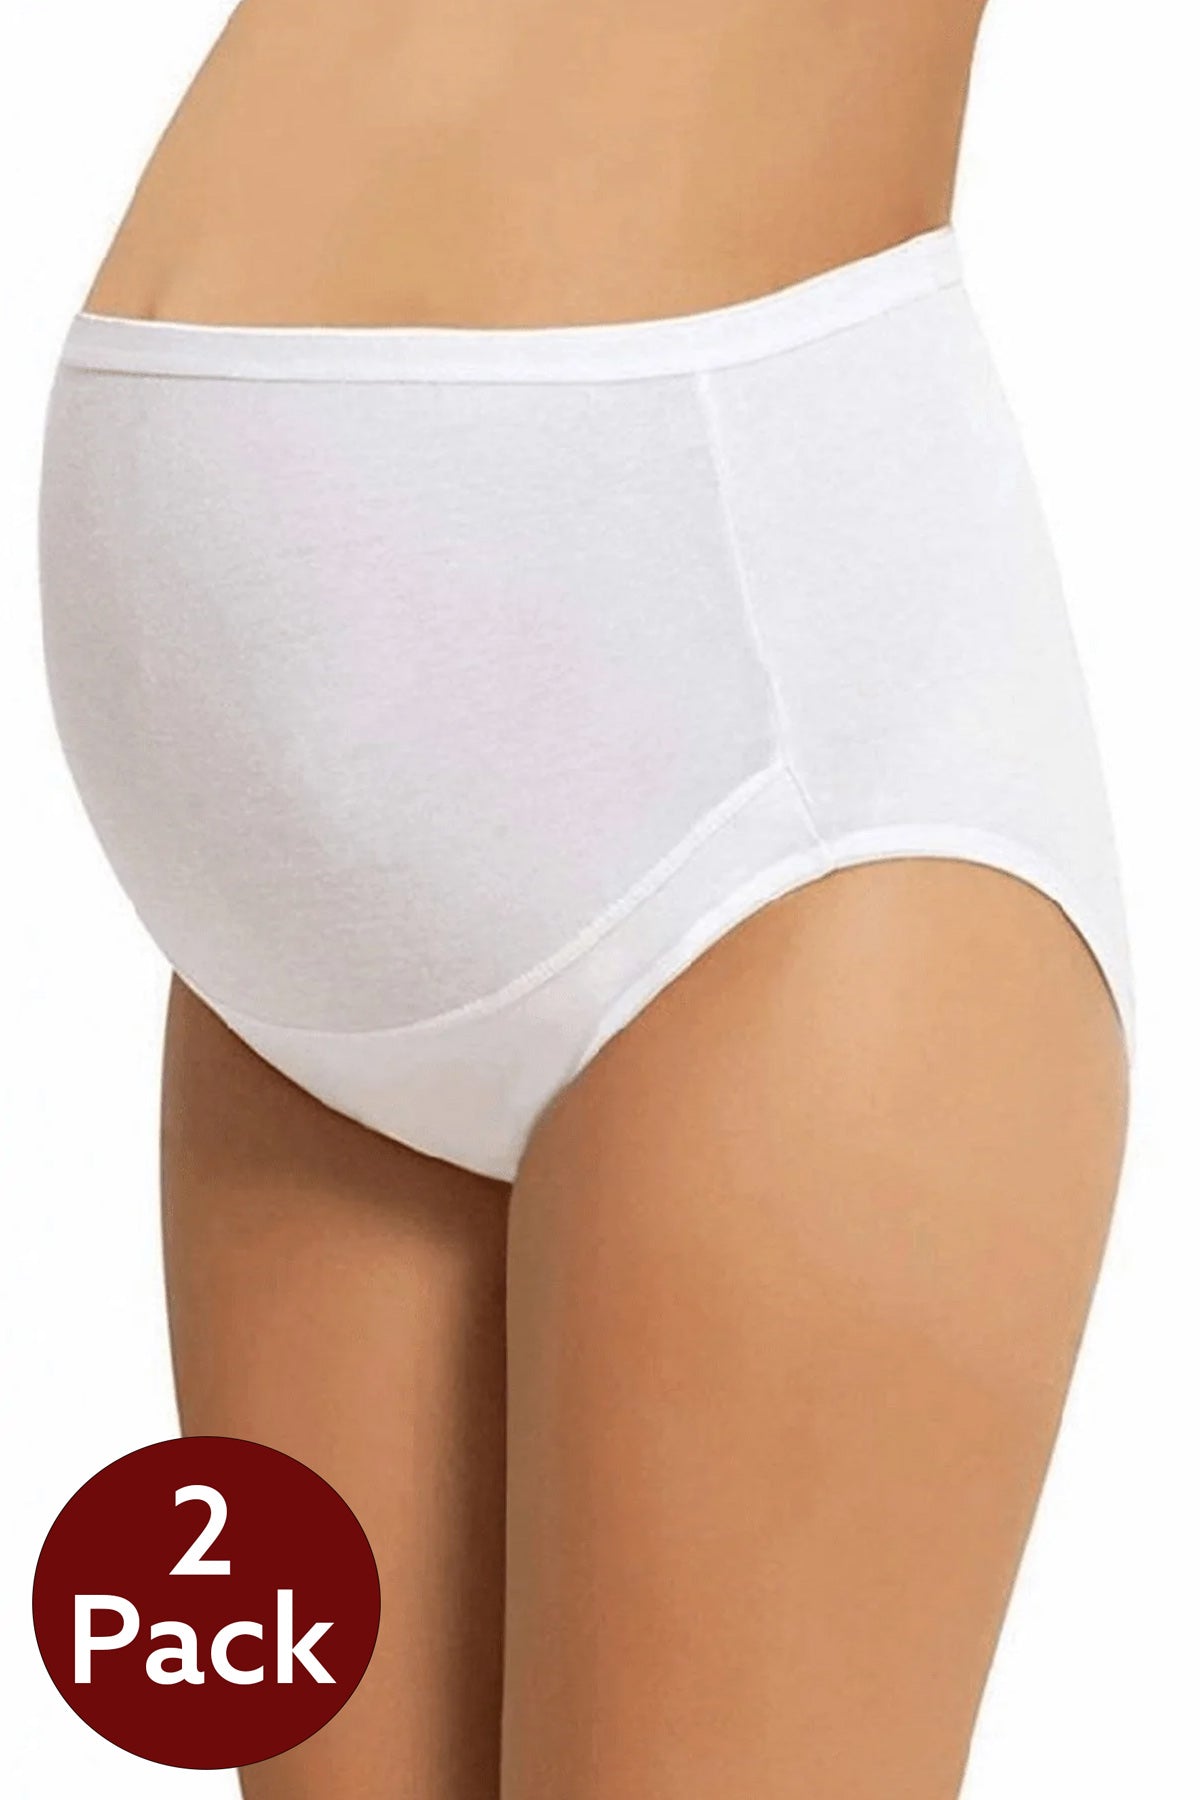 Shopymommy 1003 2-Pack Cotton Maternity Panties White